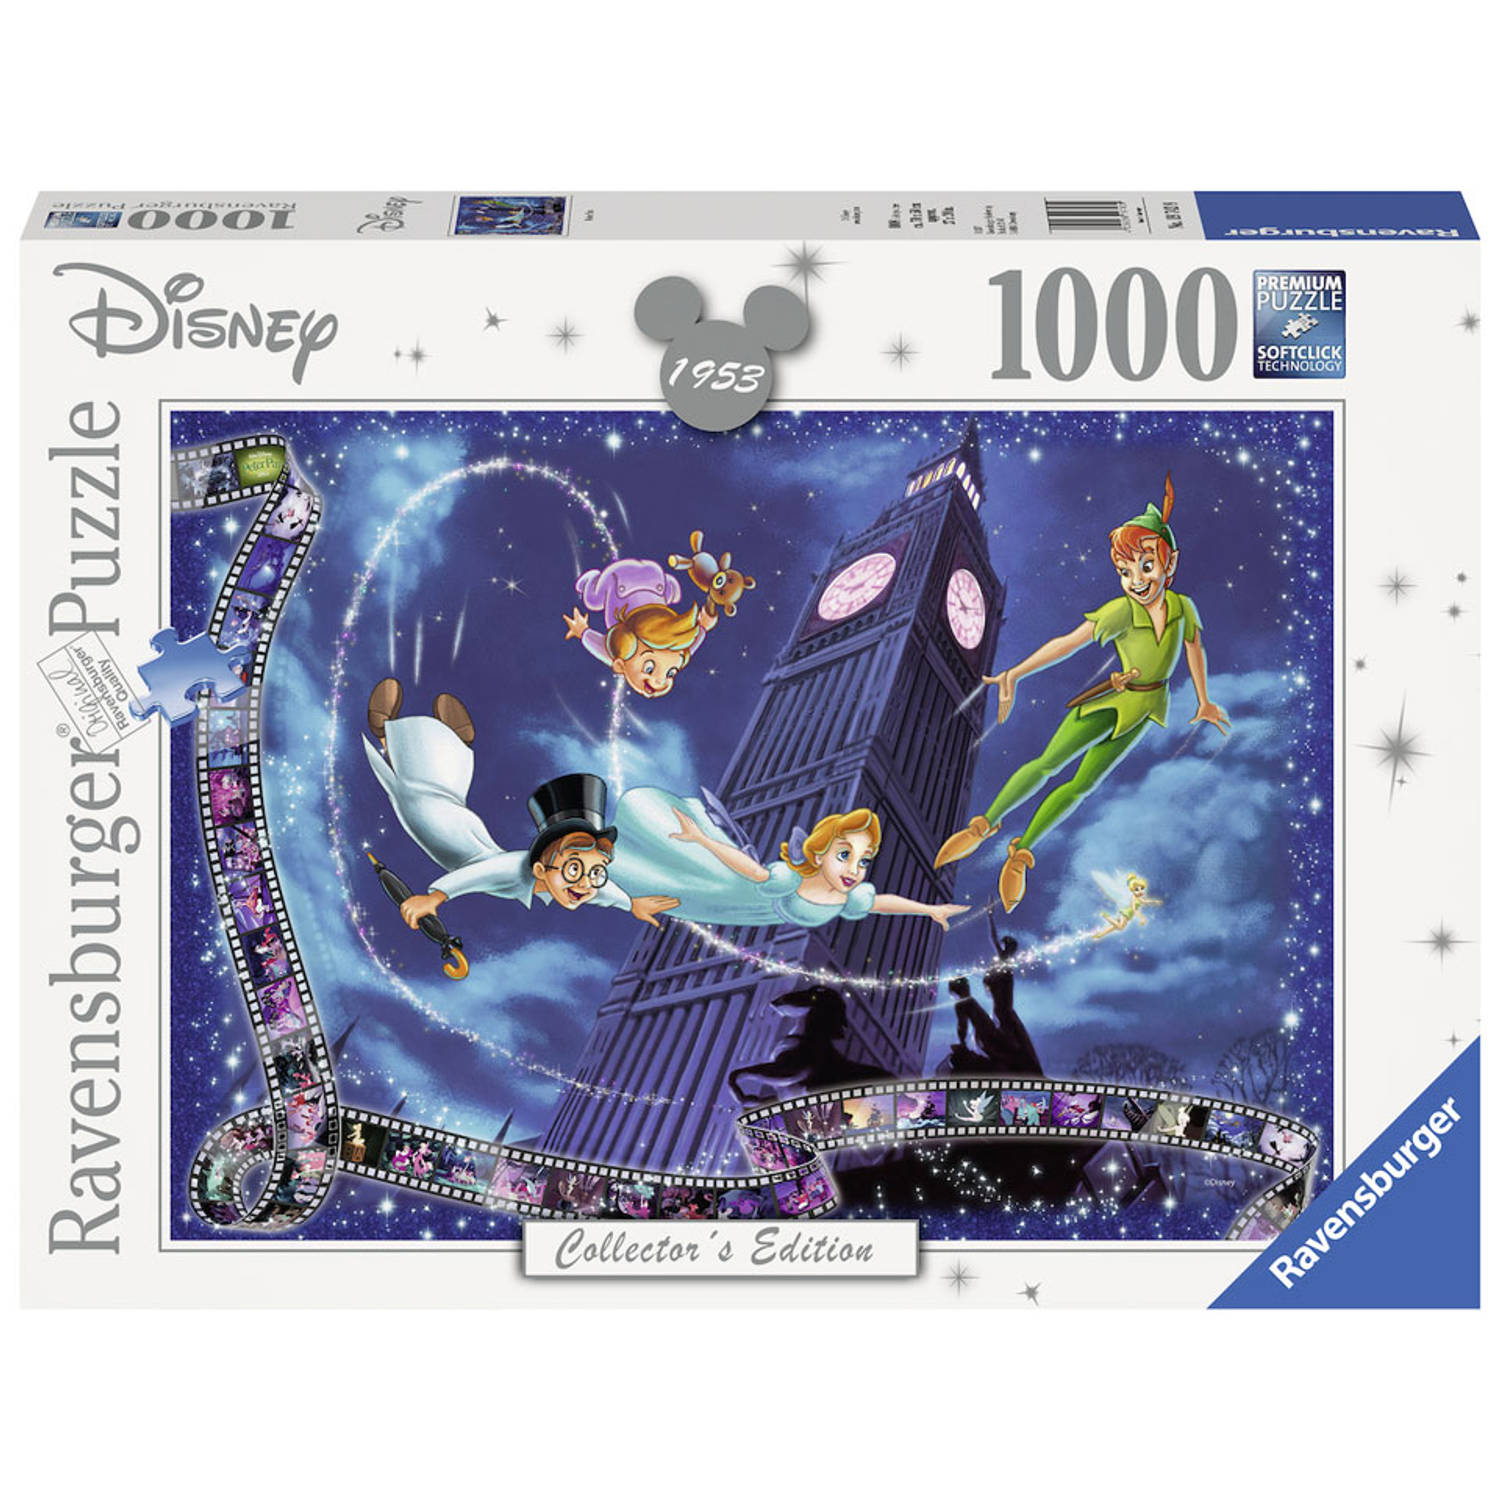 Disney Collector's Edition Peter Pan, 1000st.